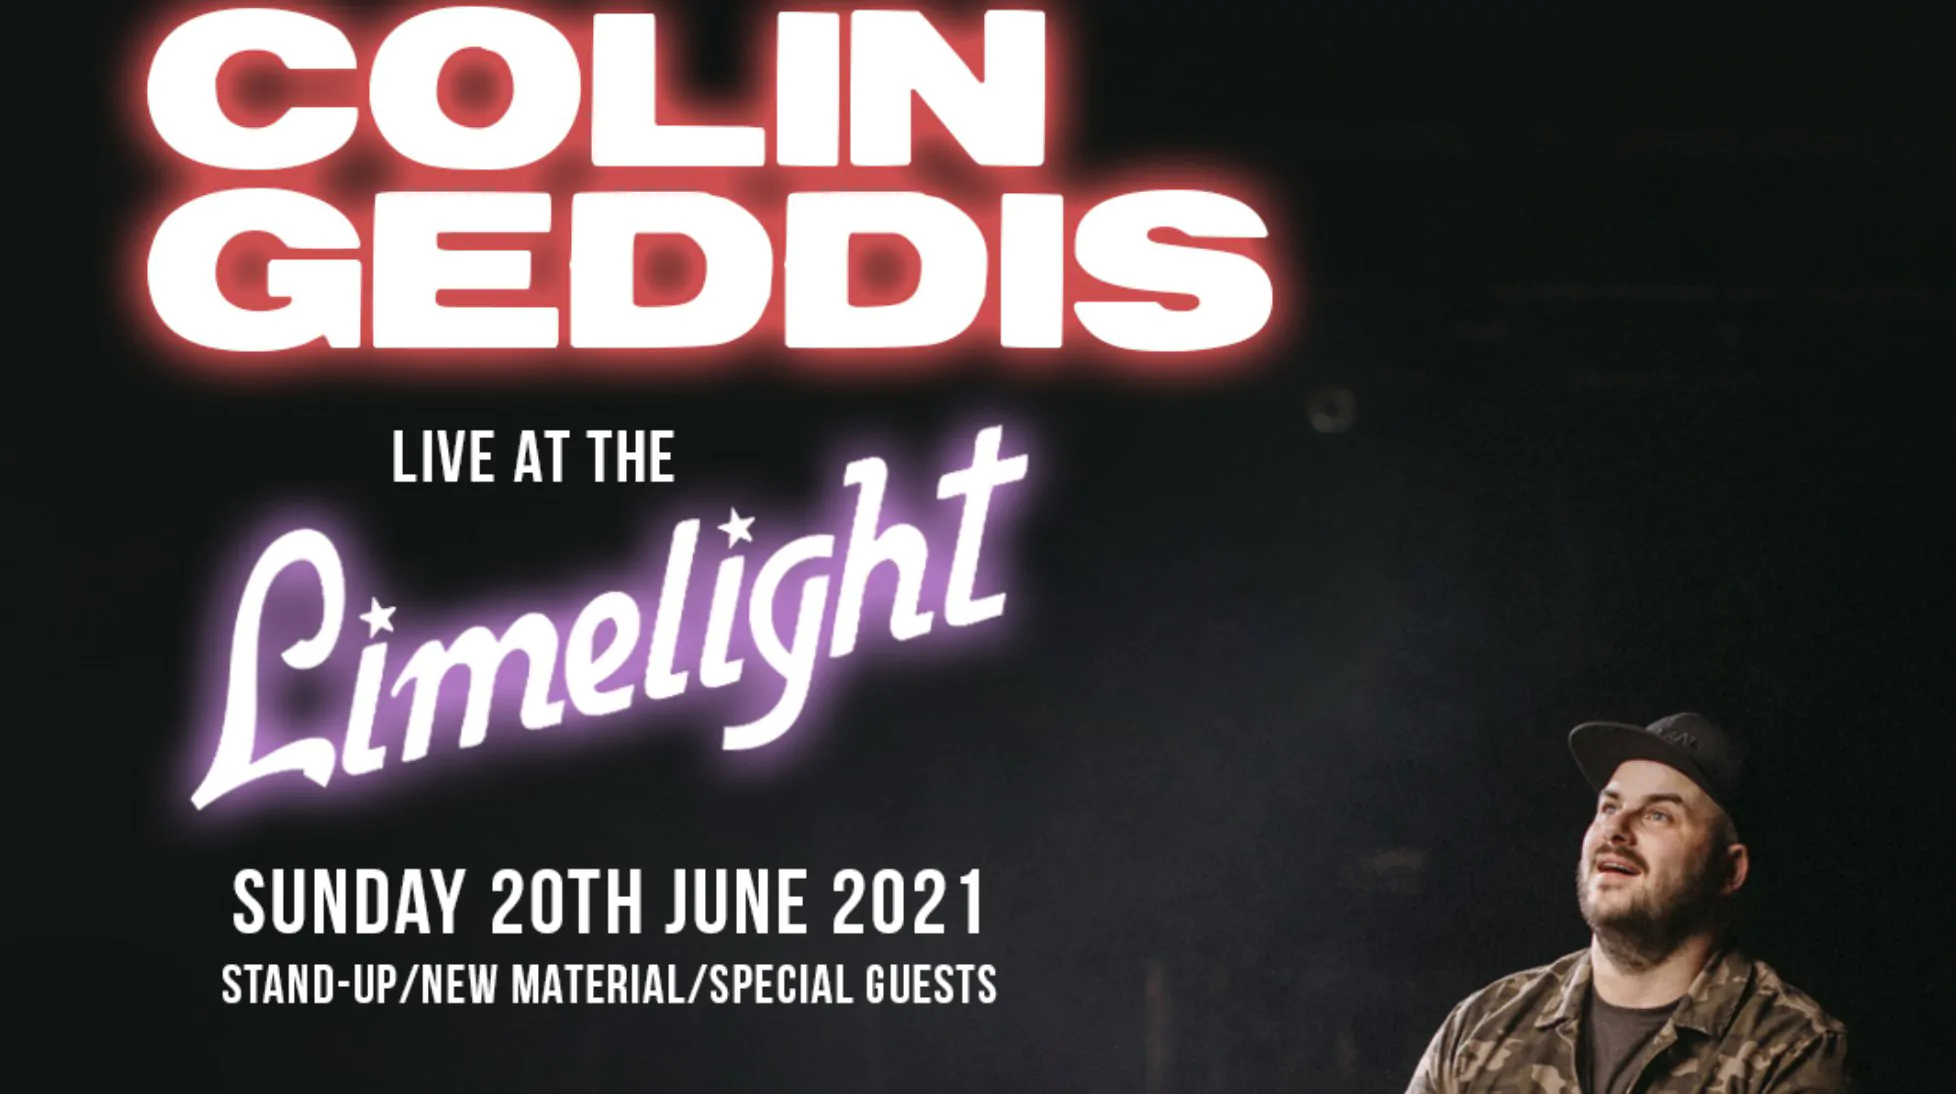 COLIN GEDDIS announces ‘Live at the Limelight’ – Sunday 20th June 2021